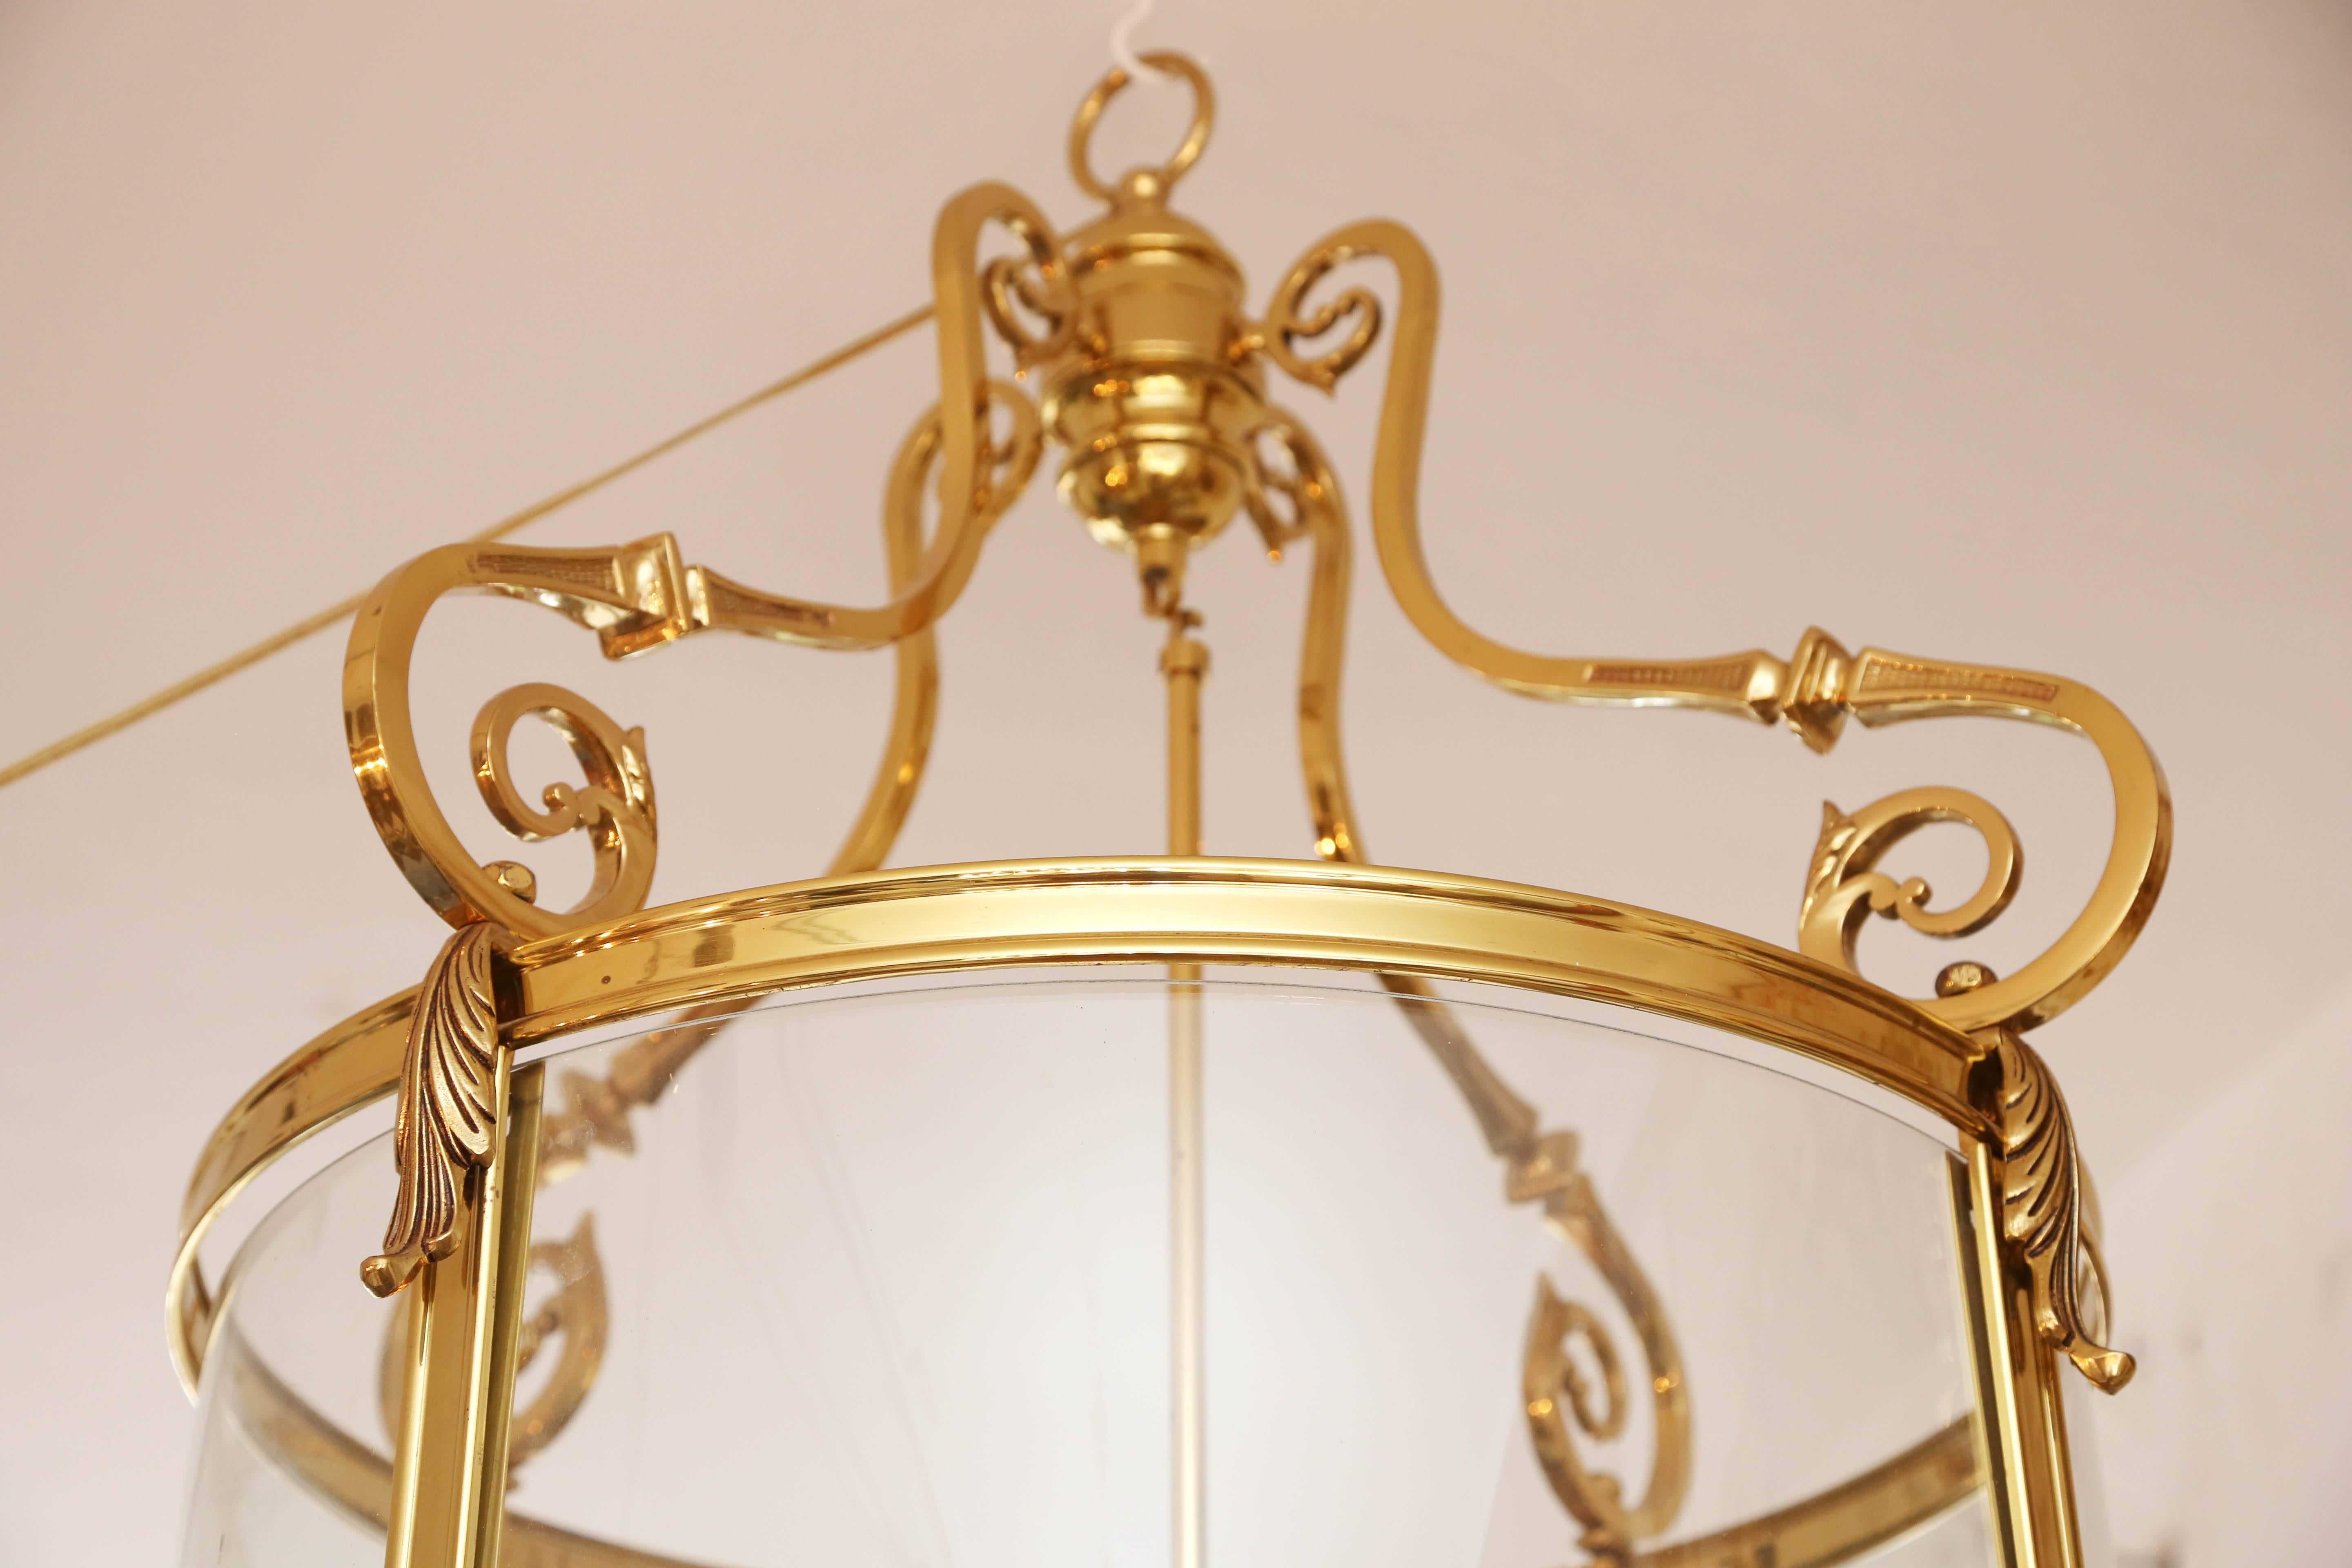 This is a superb solid brass chandelier Lantern from a home in palm beach, its in very good condition no breaks or damaged to the glass or the brass.
Its very heavy and very large, the measurements are 44 high and 25 wide, you could have it on a